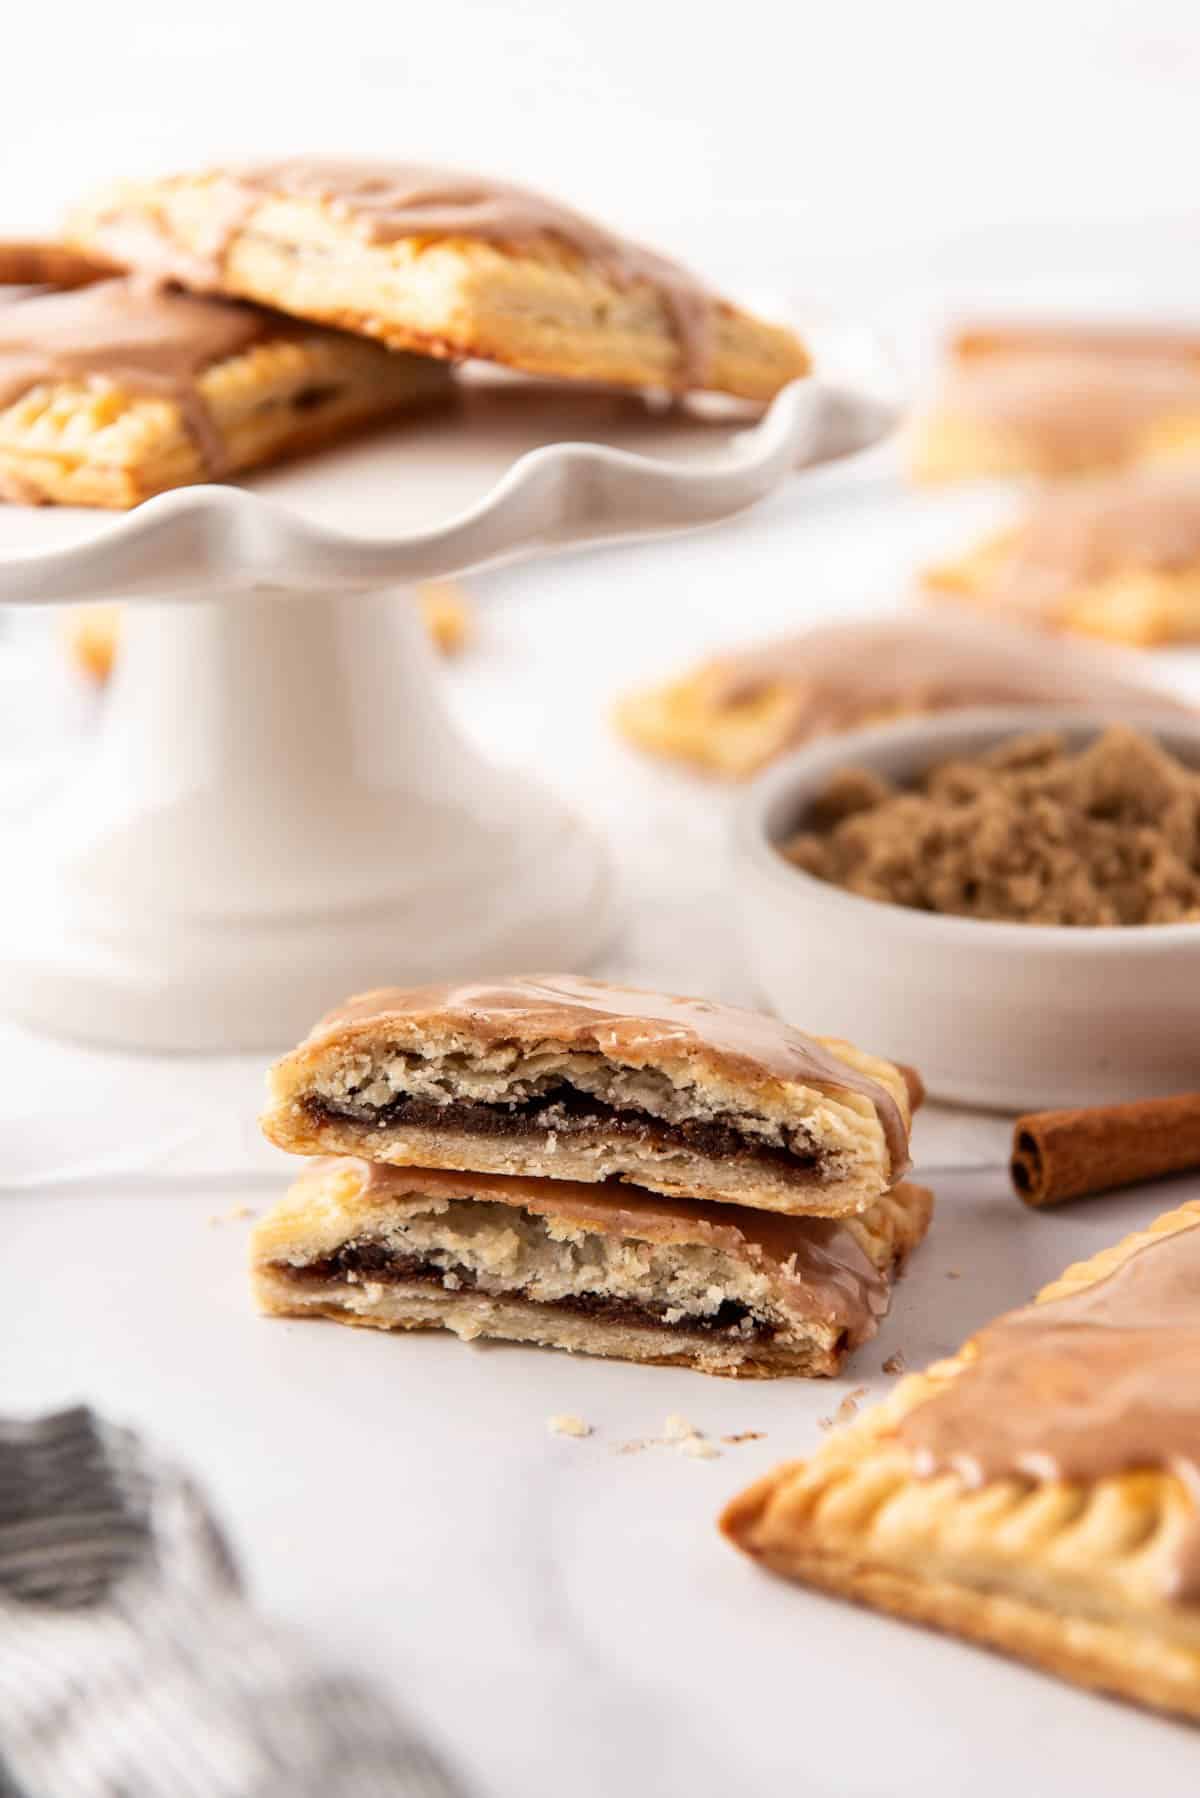 A brown sugar cinnamon pop tart that has been cut in half in front of a white cake stand with more pop tarts.